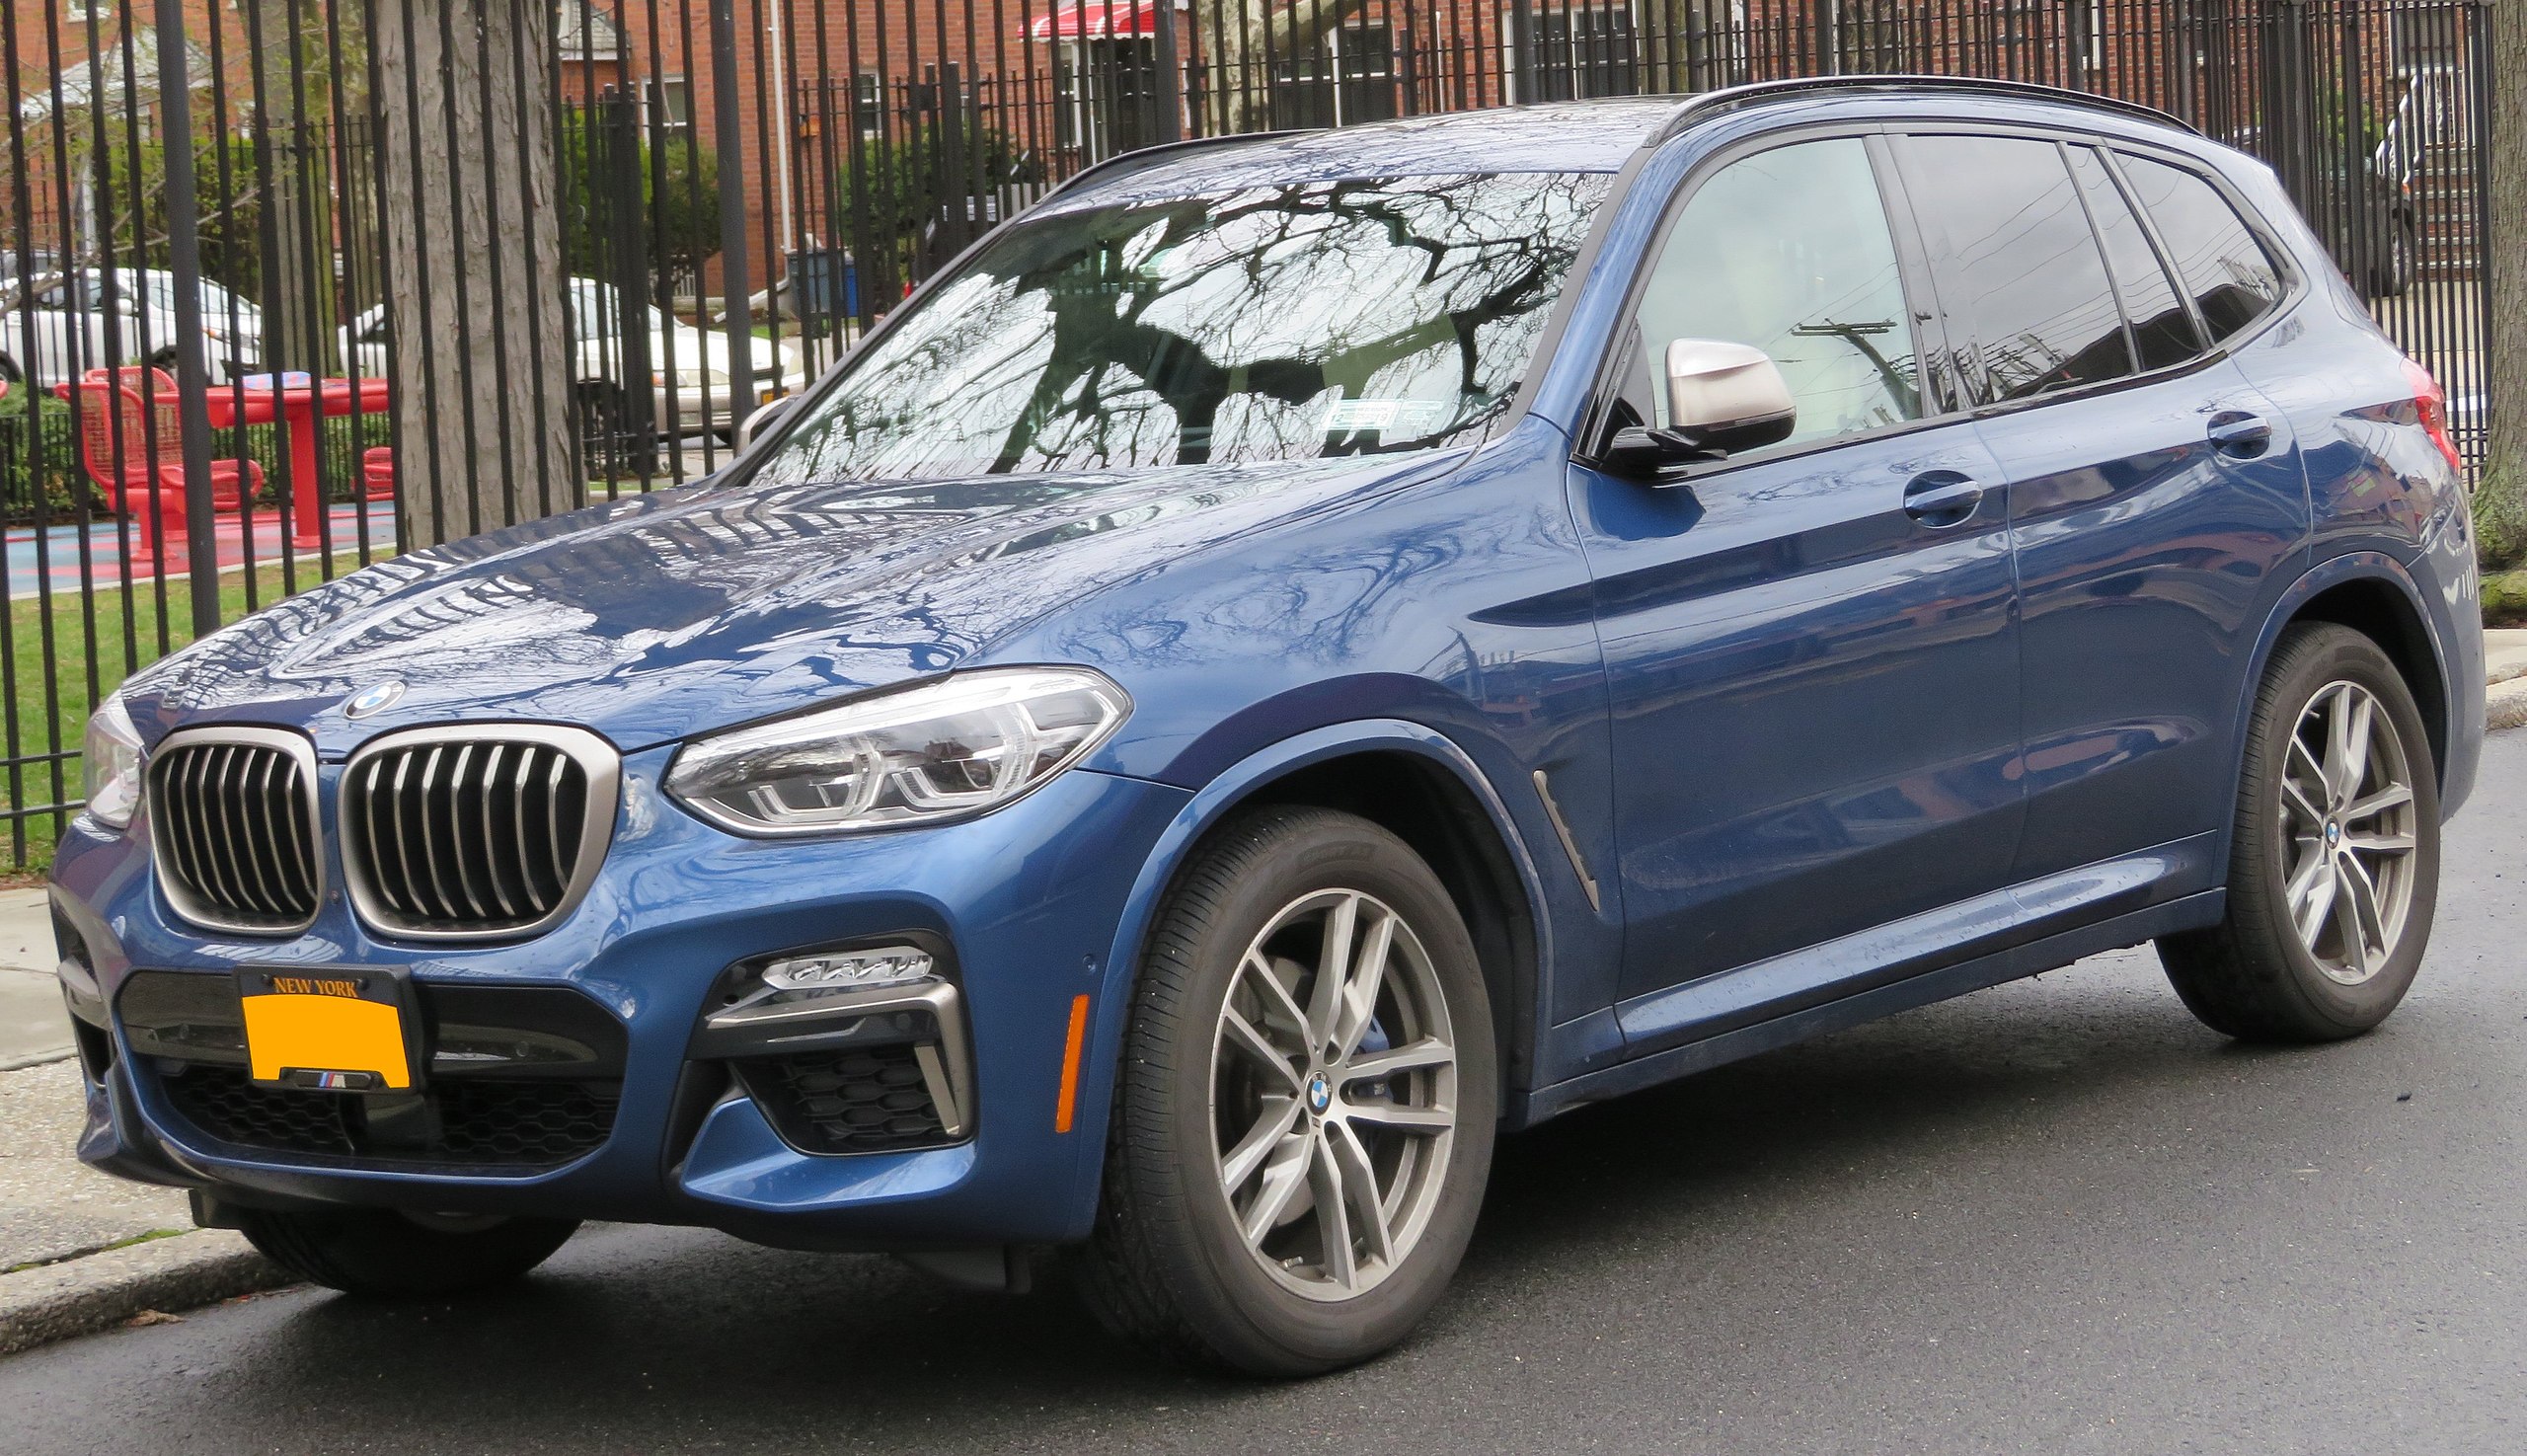 File:2018 BMW X3 (G01) M40i front 4.19.18.jpg - Wikimedia Commons